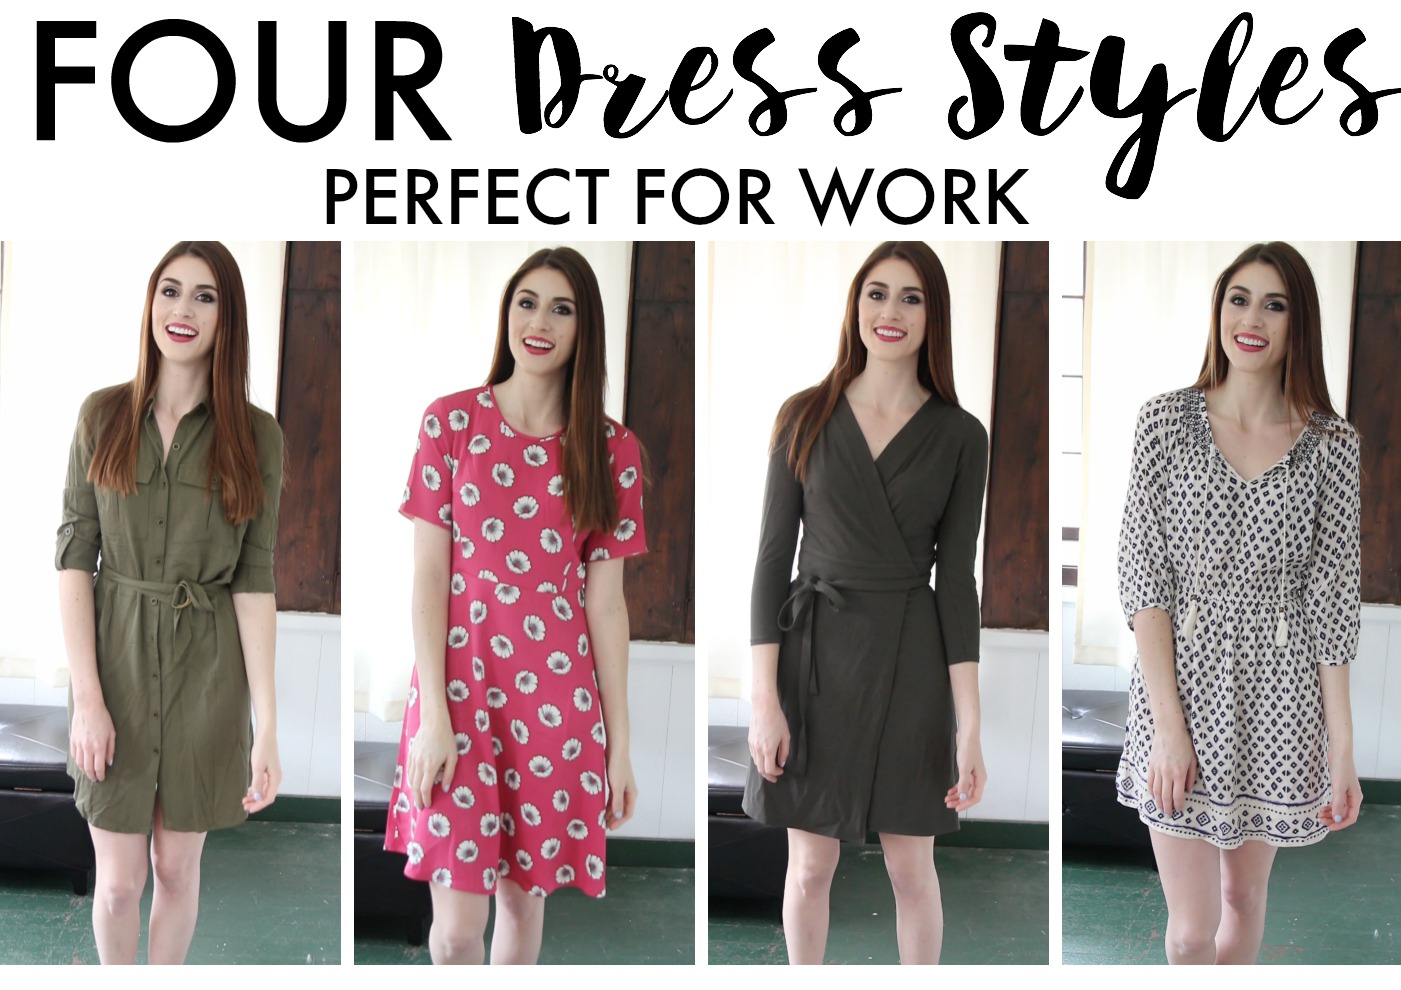 Work Dress Styles- dresses that are perfect for work